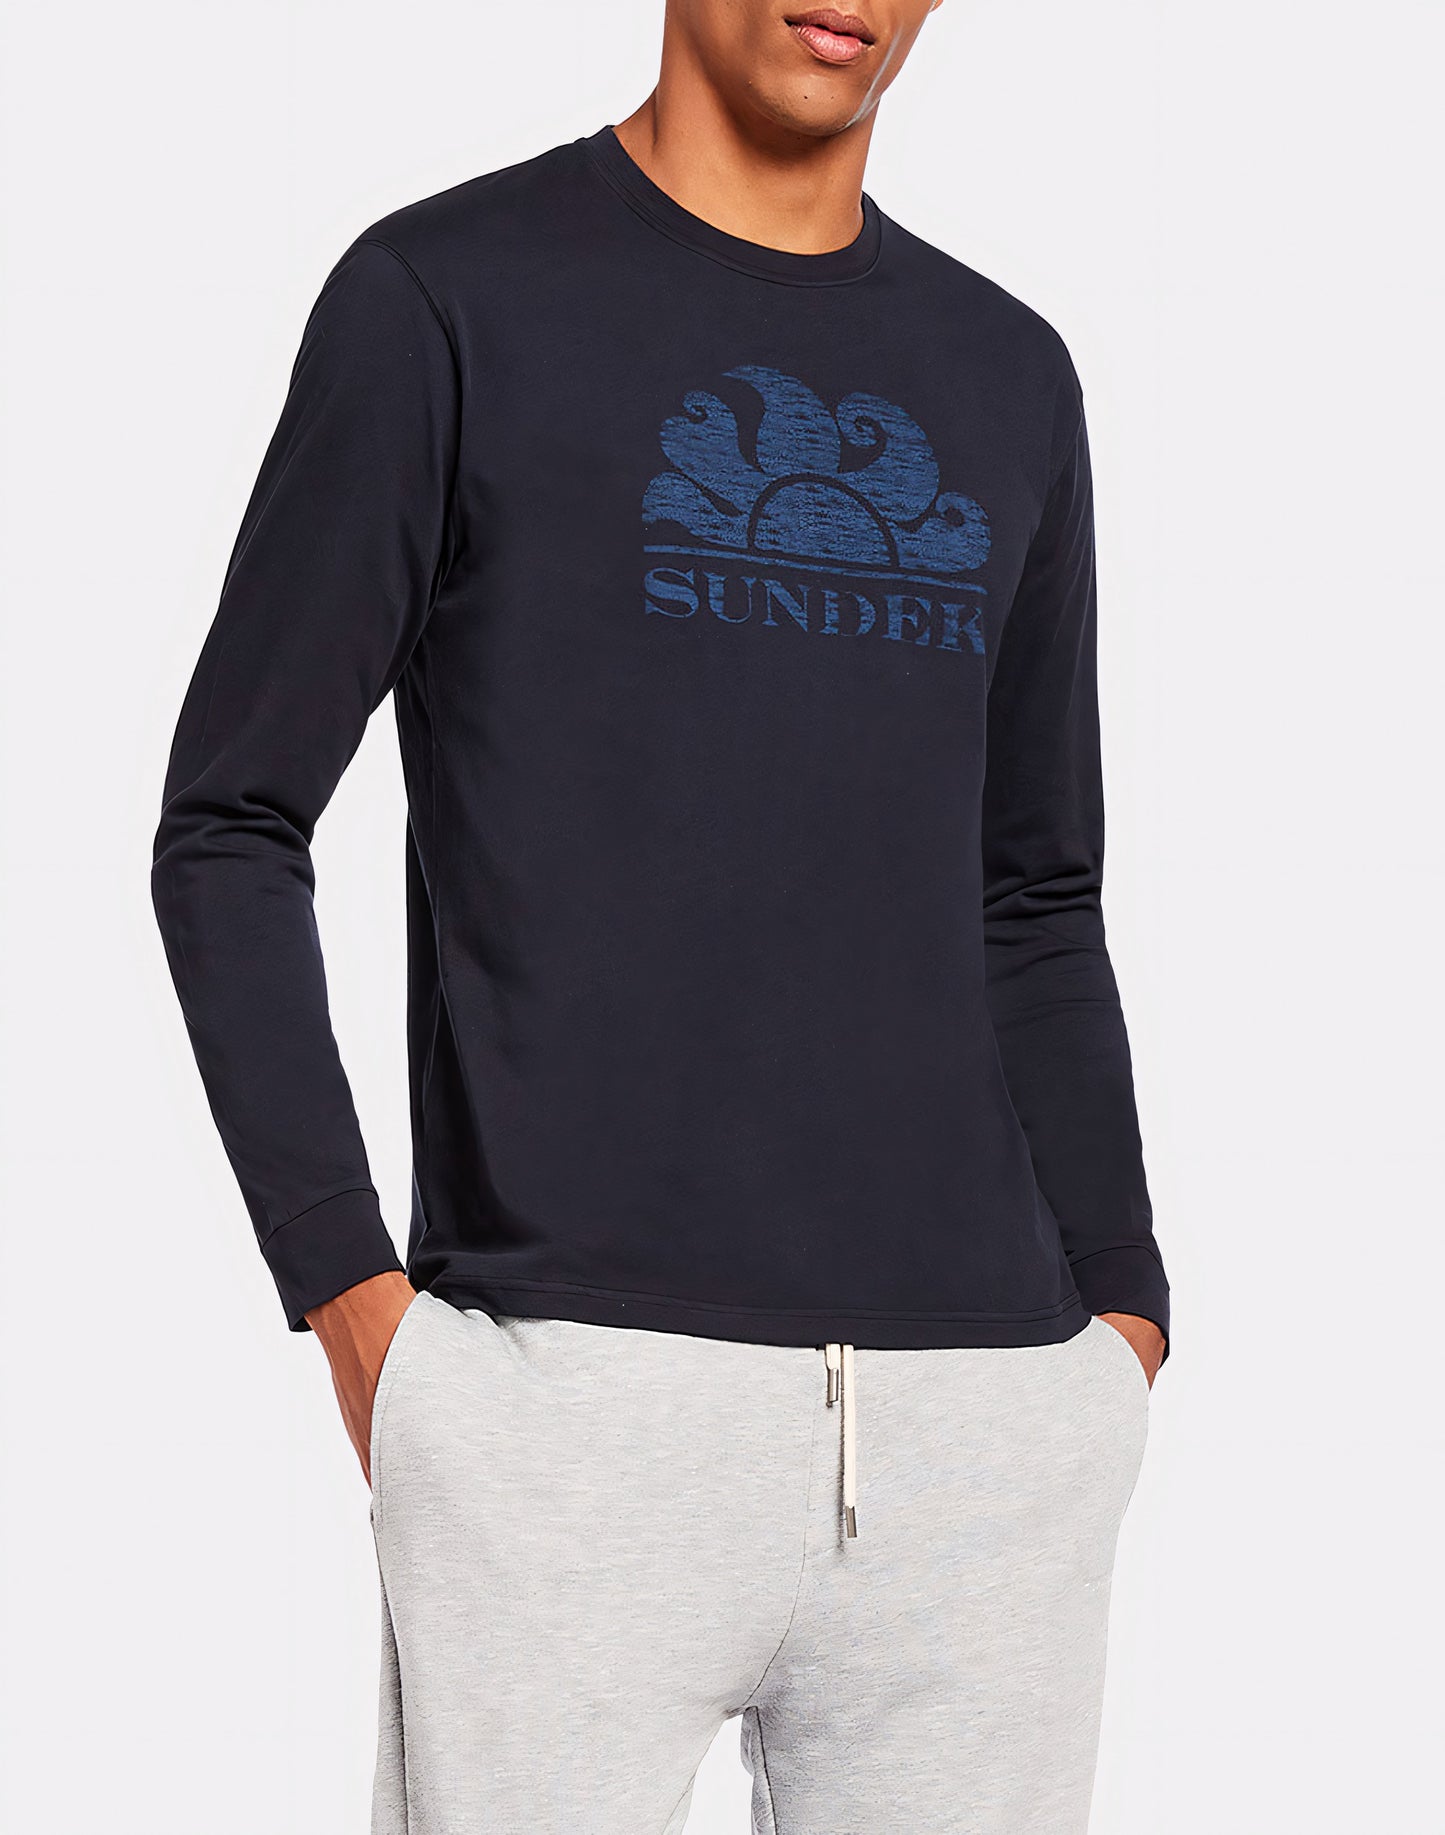 LONG-SLEEVED T-SHIRT WITH LOGO